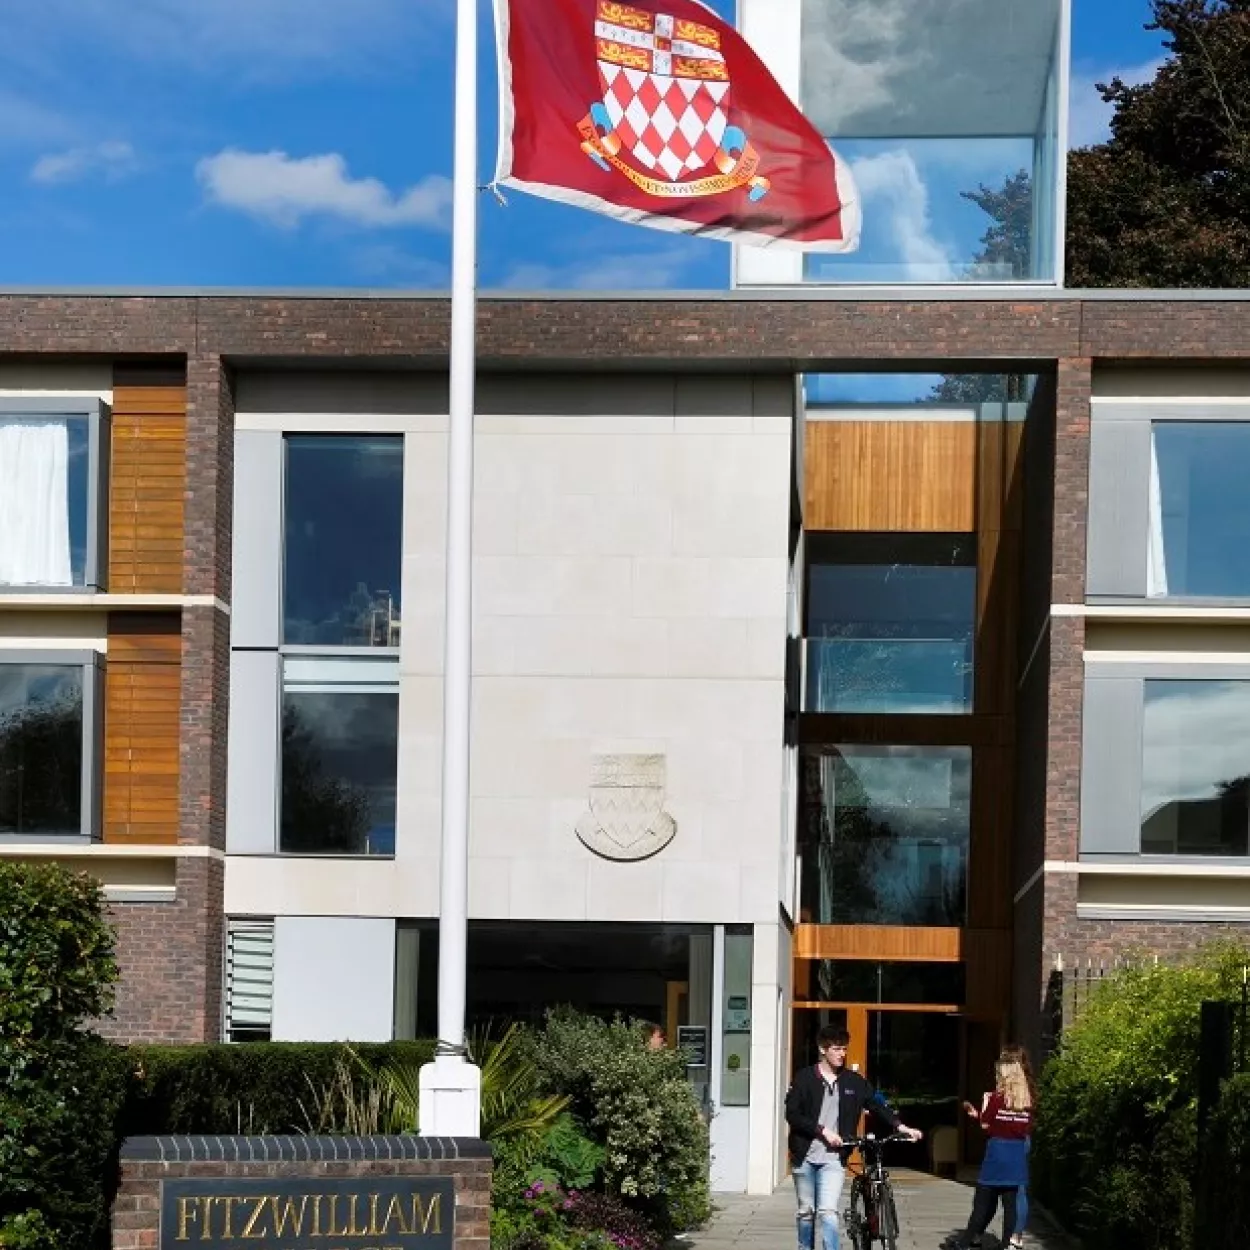 Photo of Fitzwilliam College Porters' Lodge with flag flying of College crest and students entering building